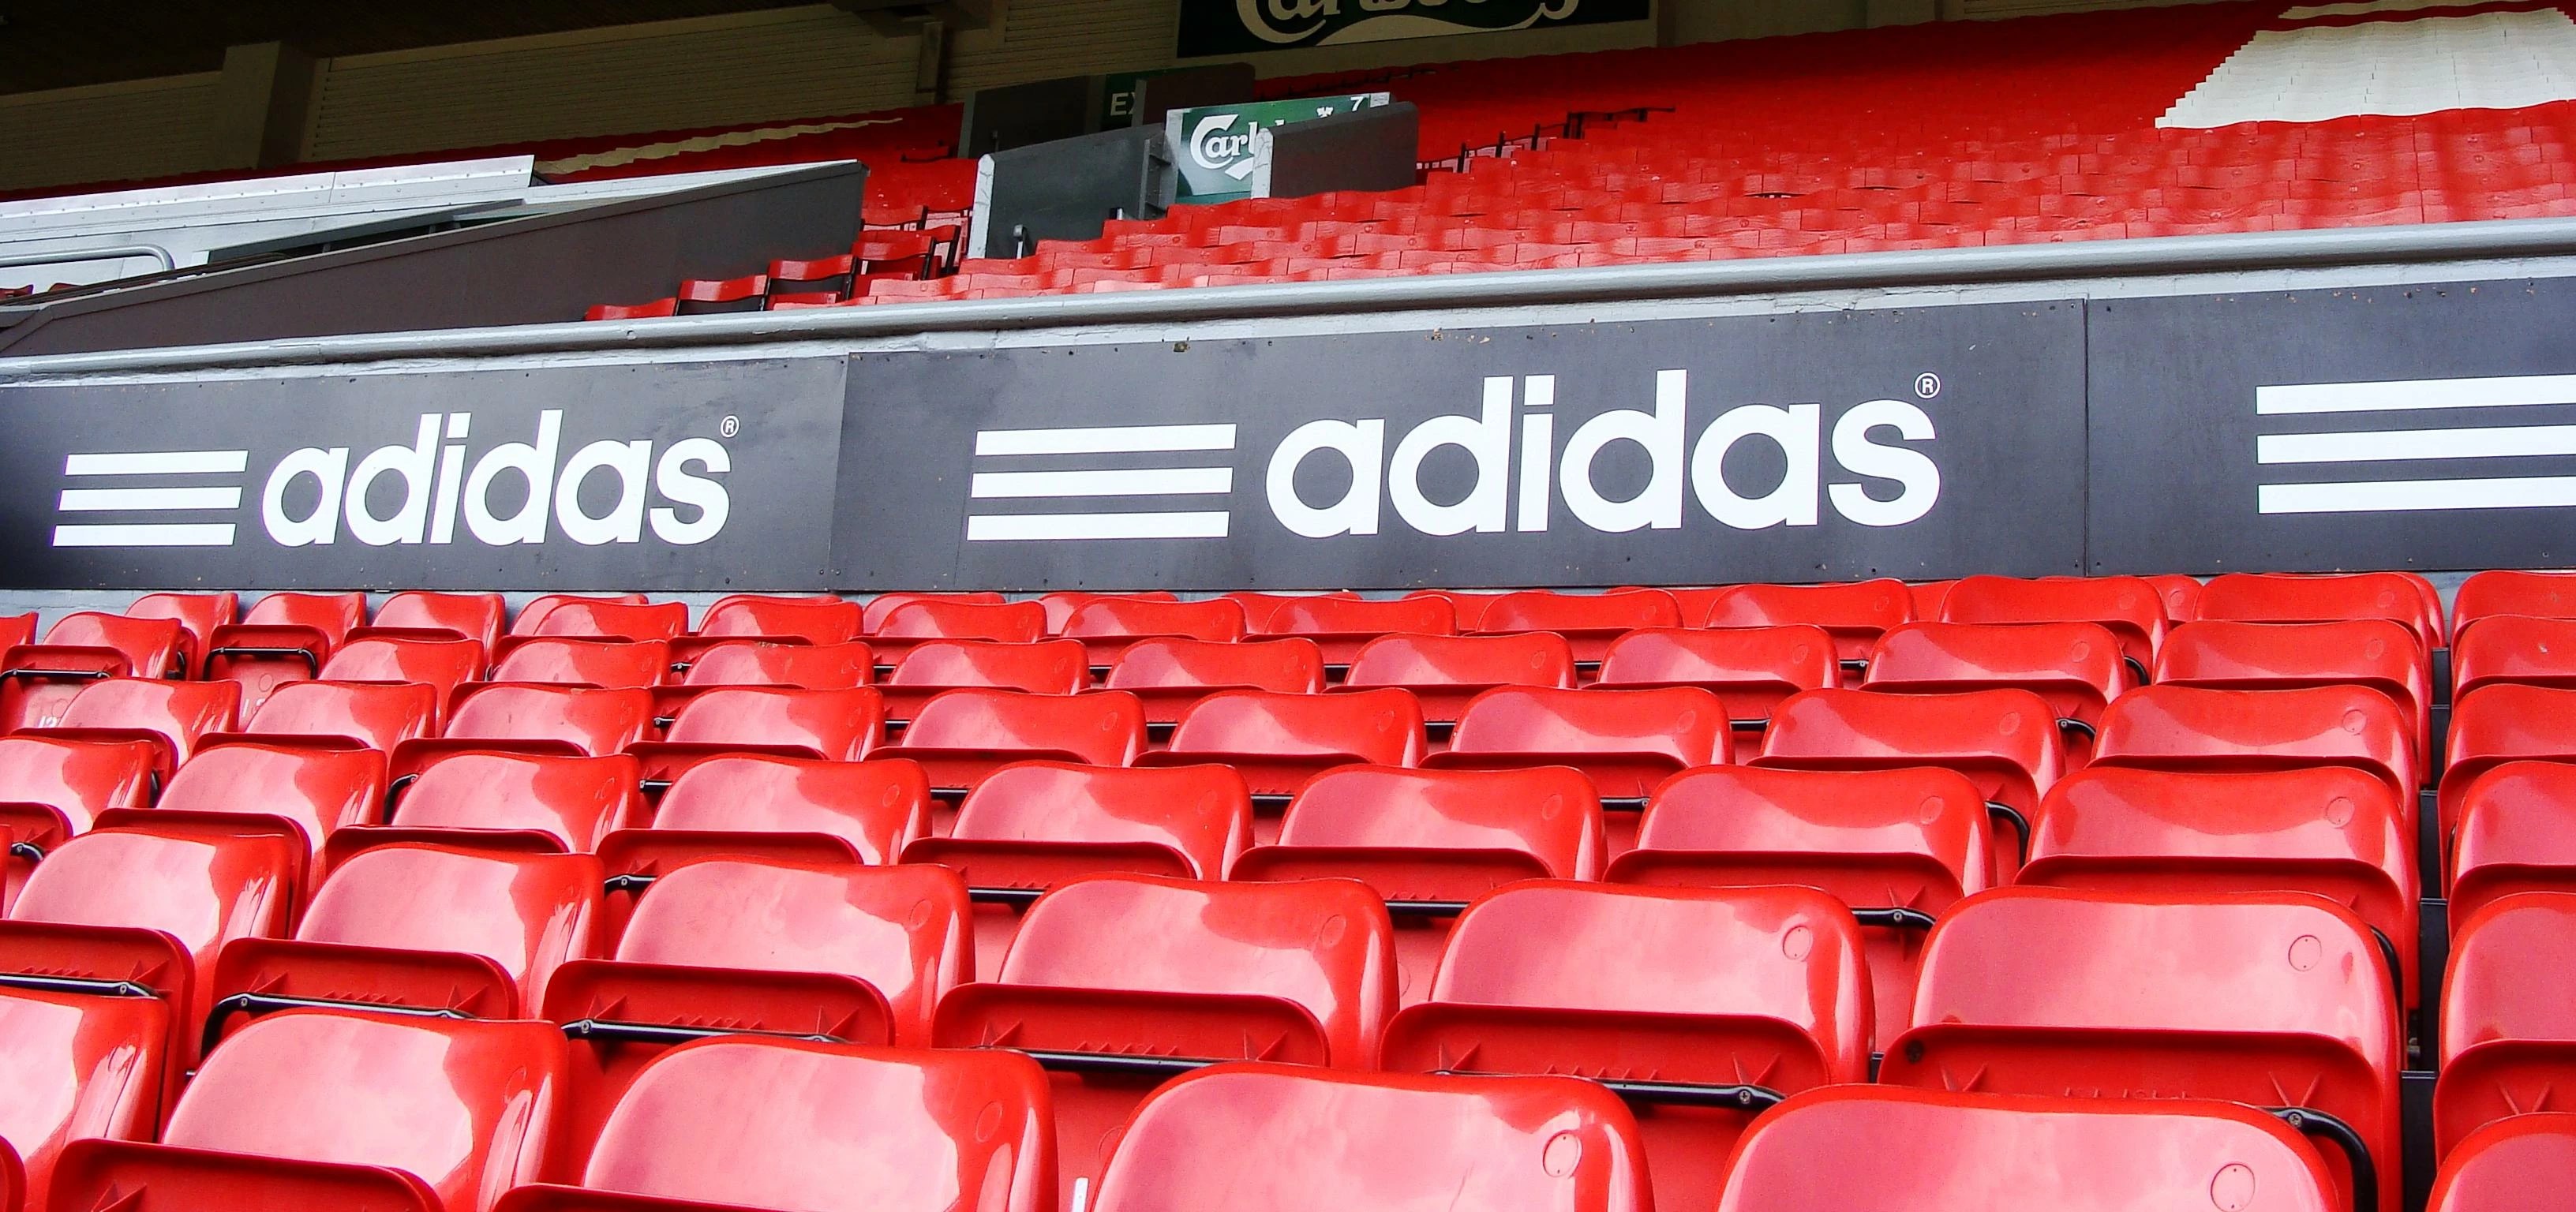 Adidas boards at Anfield